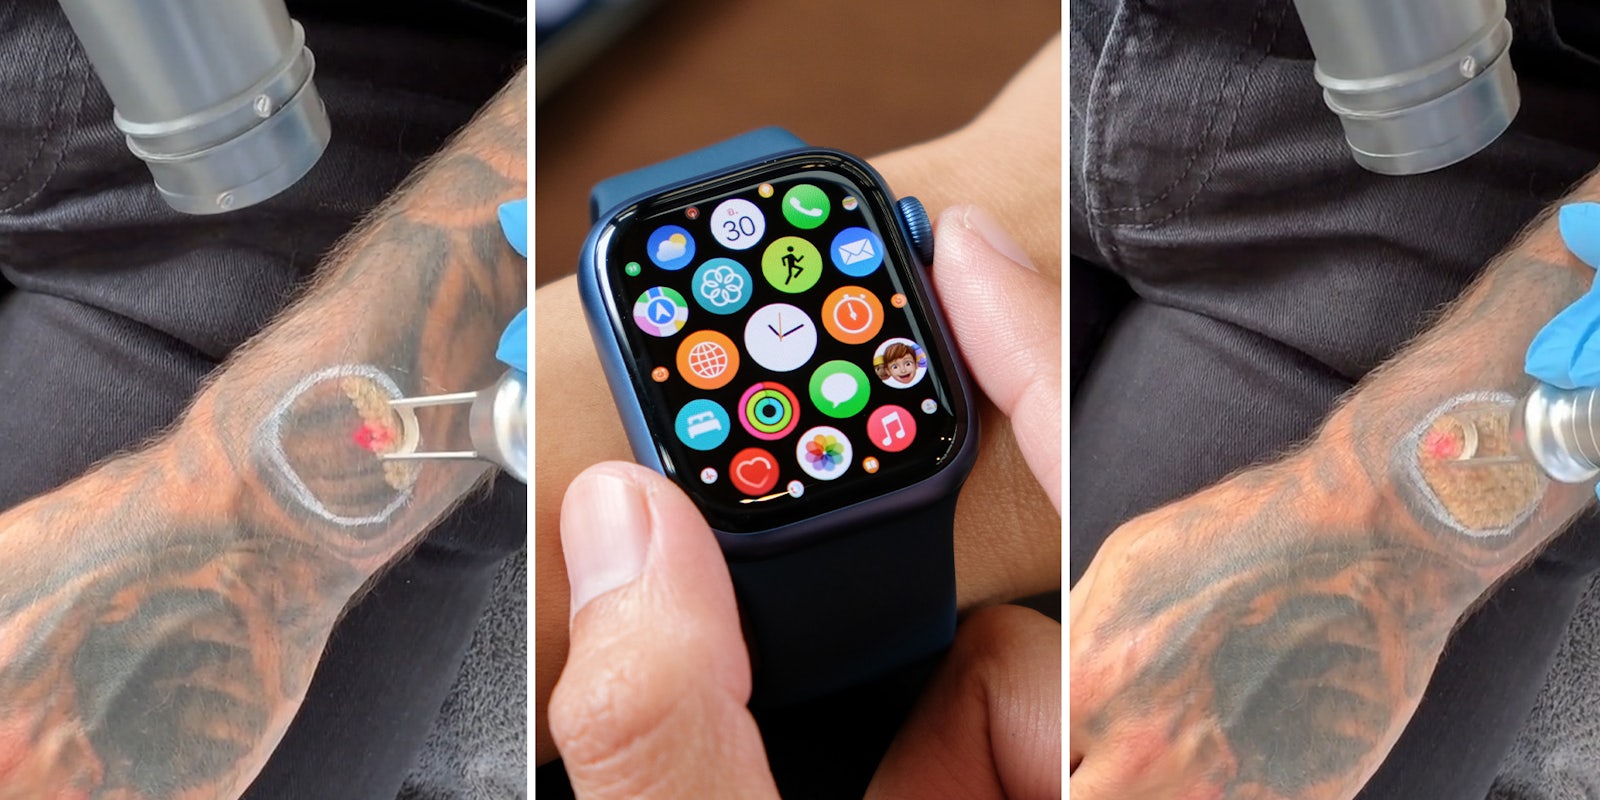 Man gets tattoo removed so Apple Watch can work properly